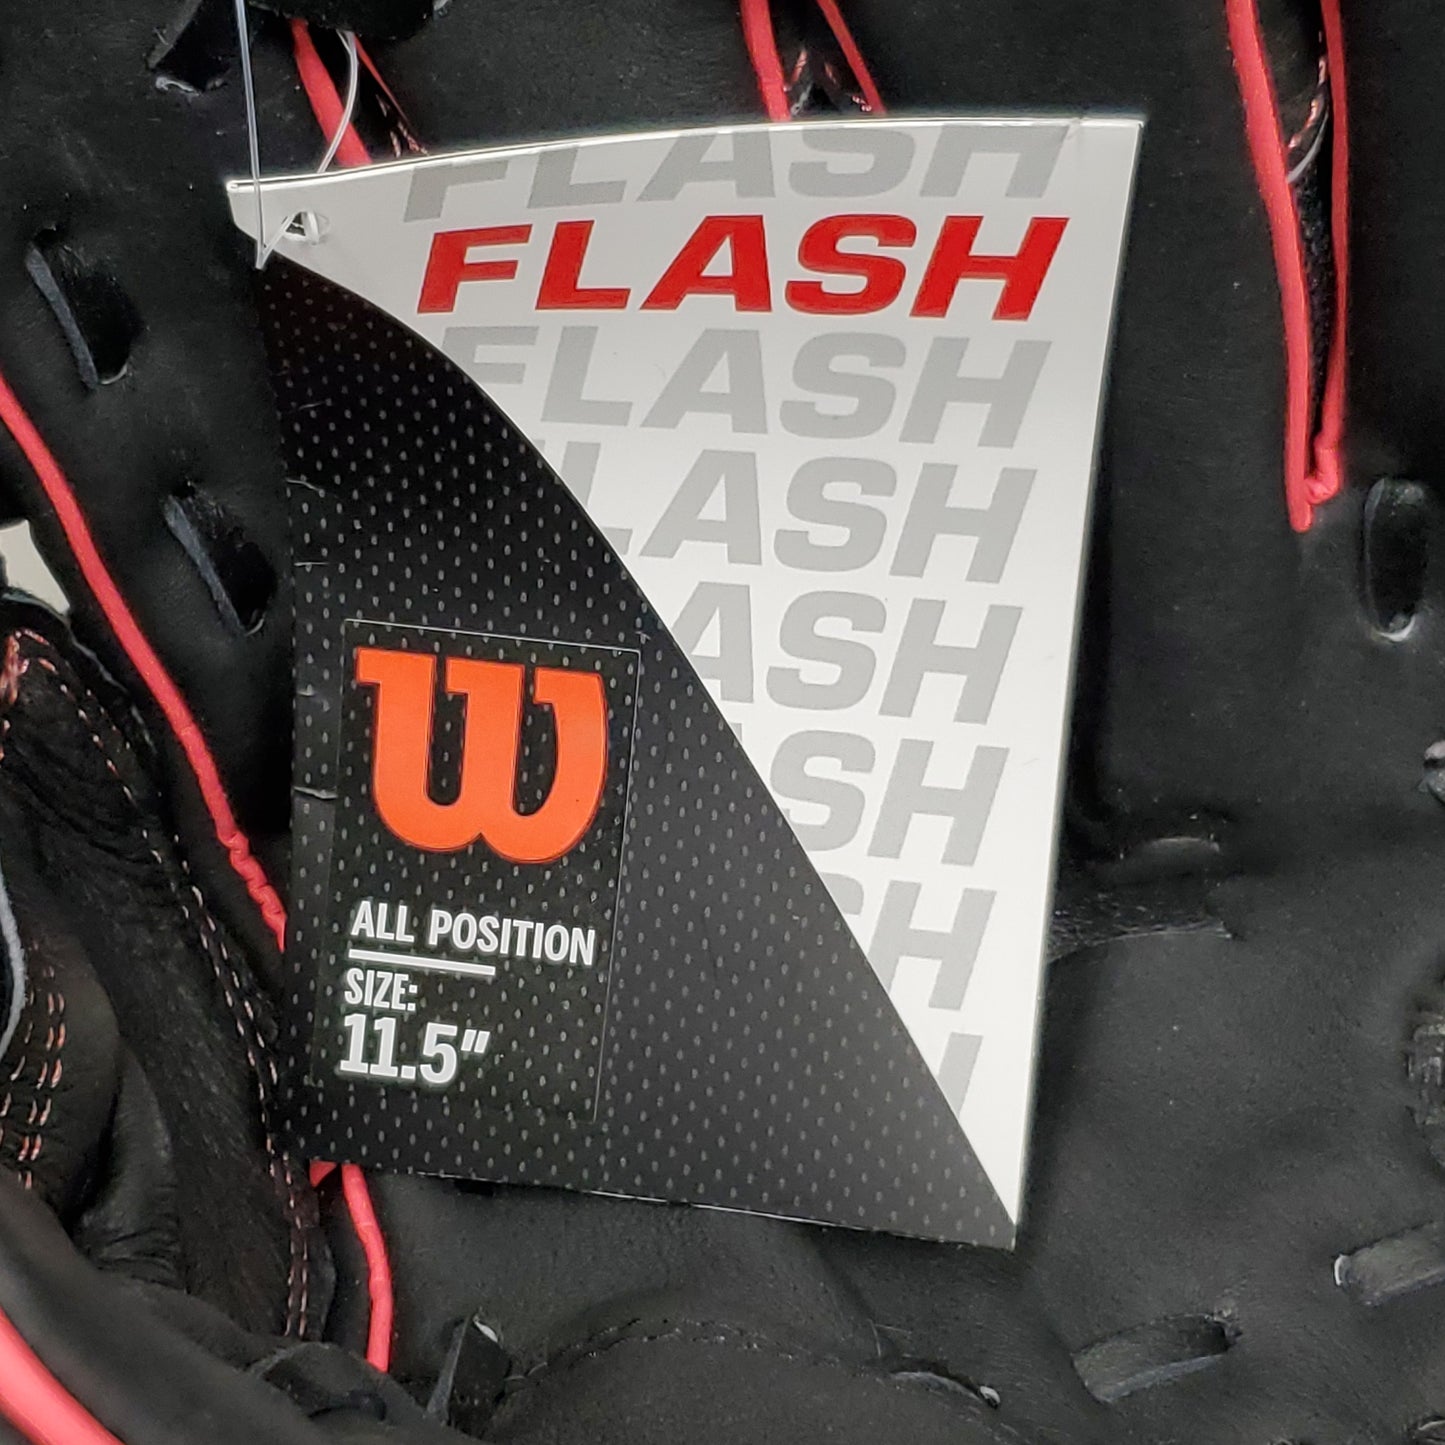 WILSON Fastpitch All Position Left Hand Mit 11.5" Flash WBW100415115 (New)